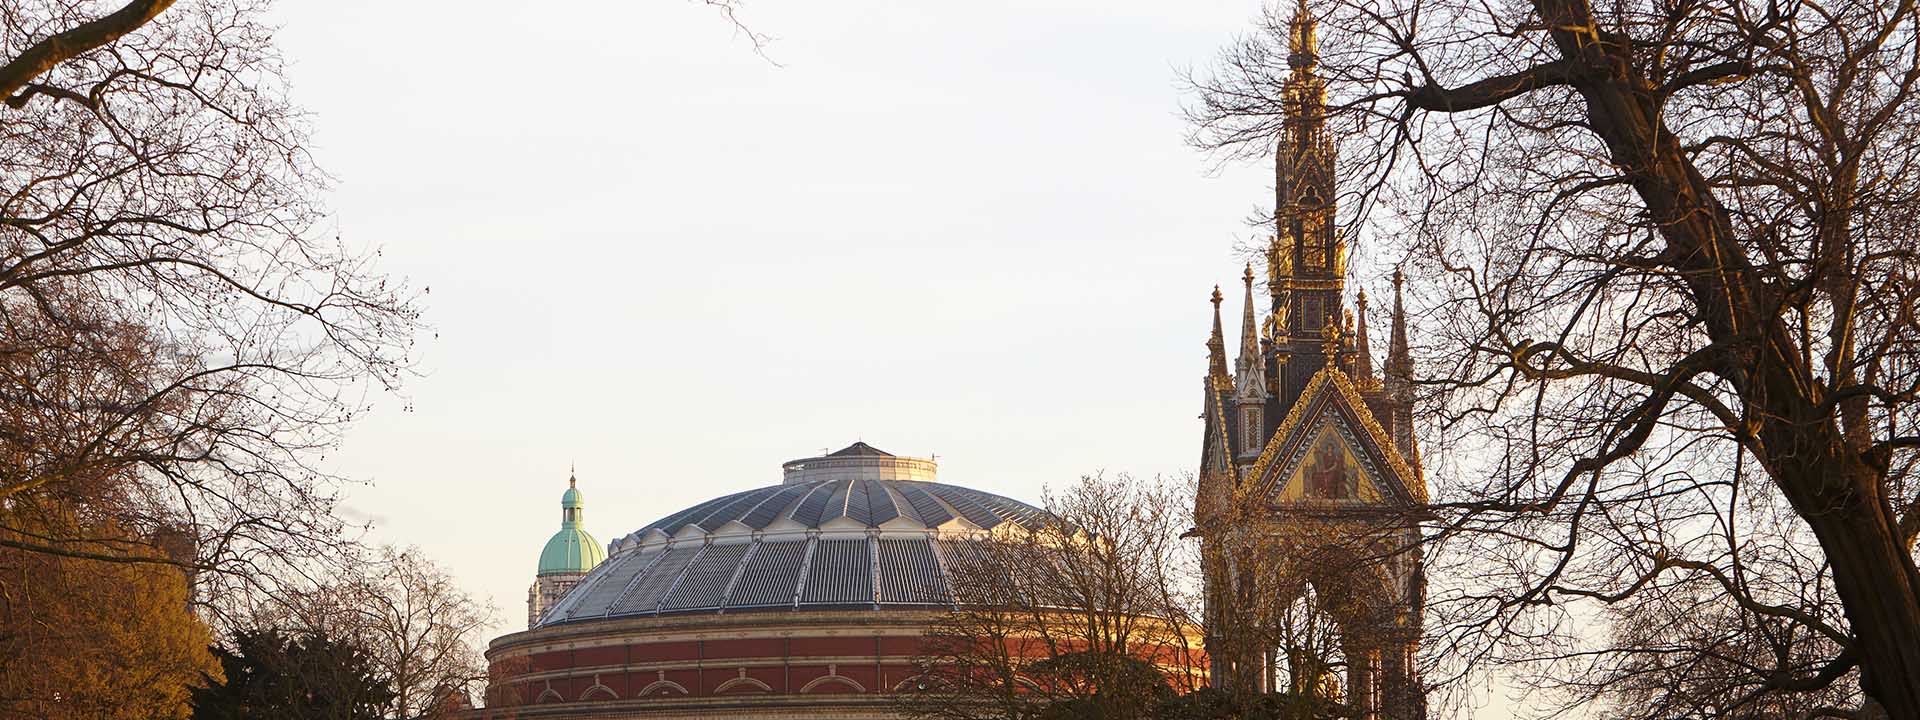 A view of Kensington Garden and Royal Albert Hall is in the background.